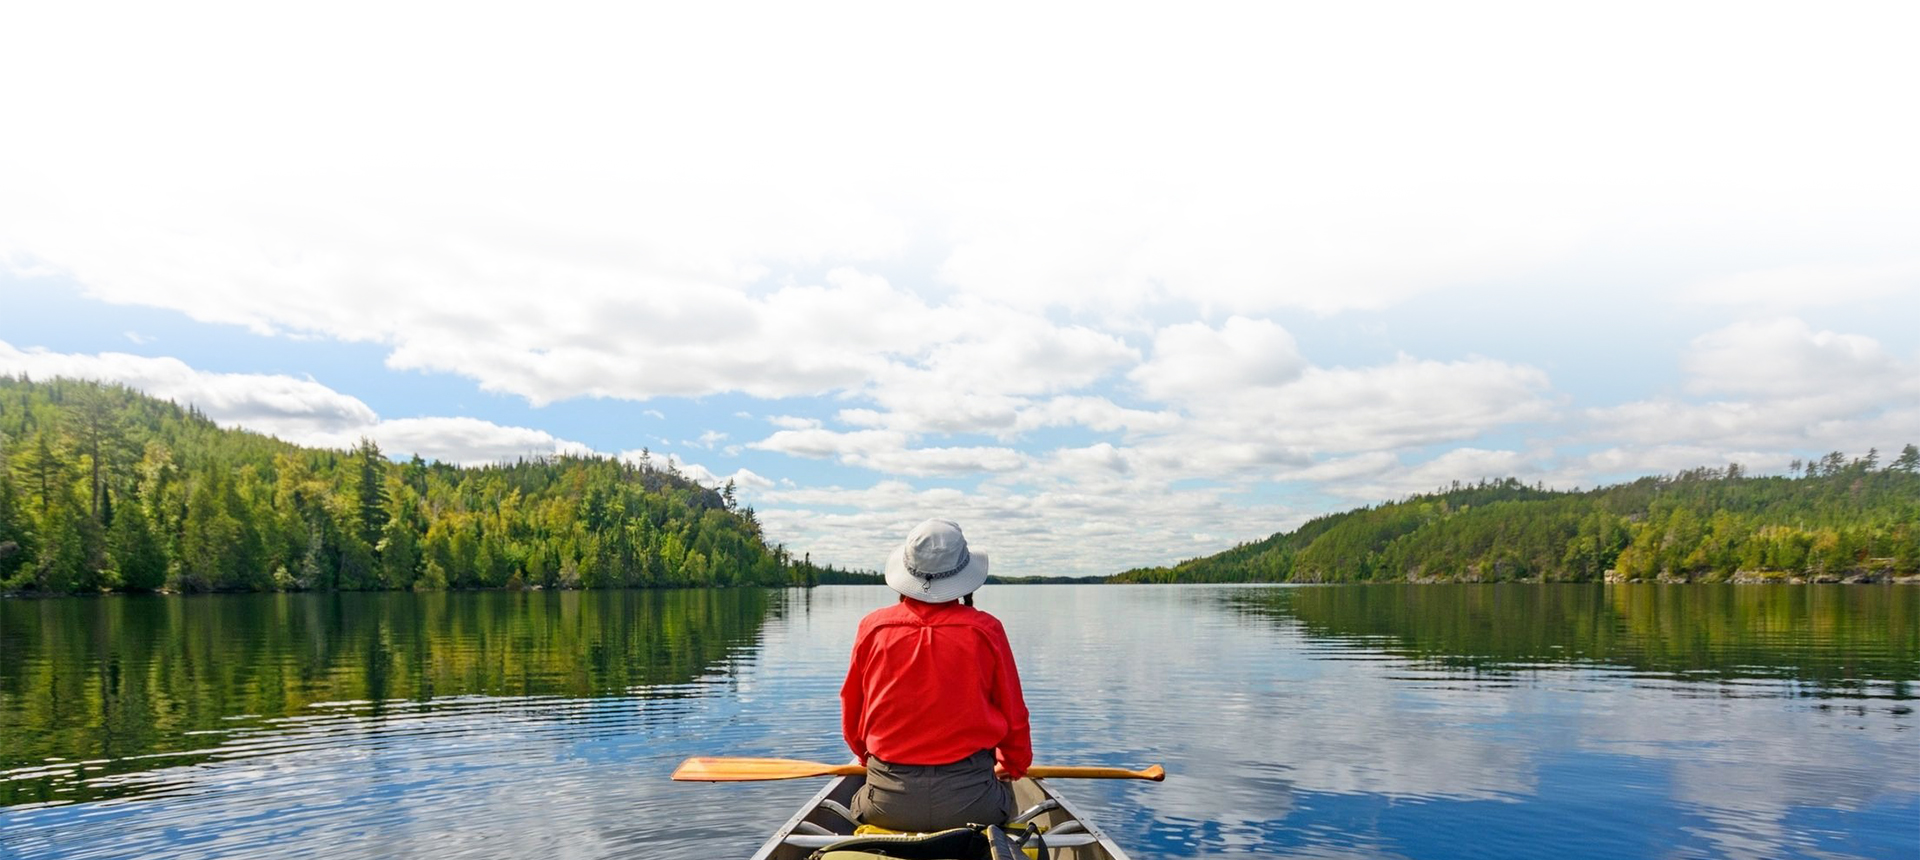 A woman is canoeing on a calm lake on a beautiful summer sunny day